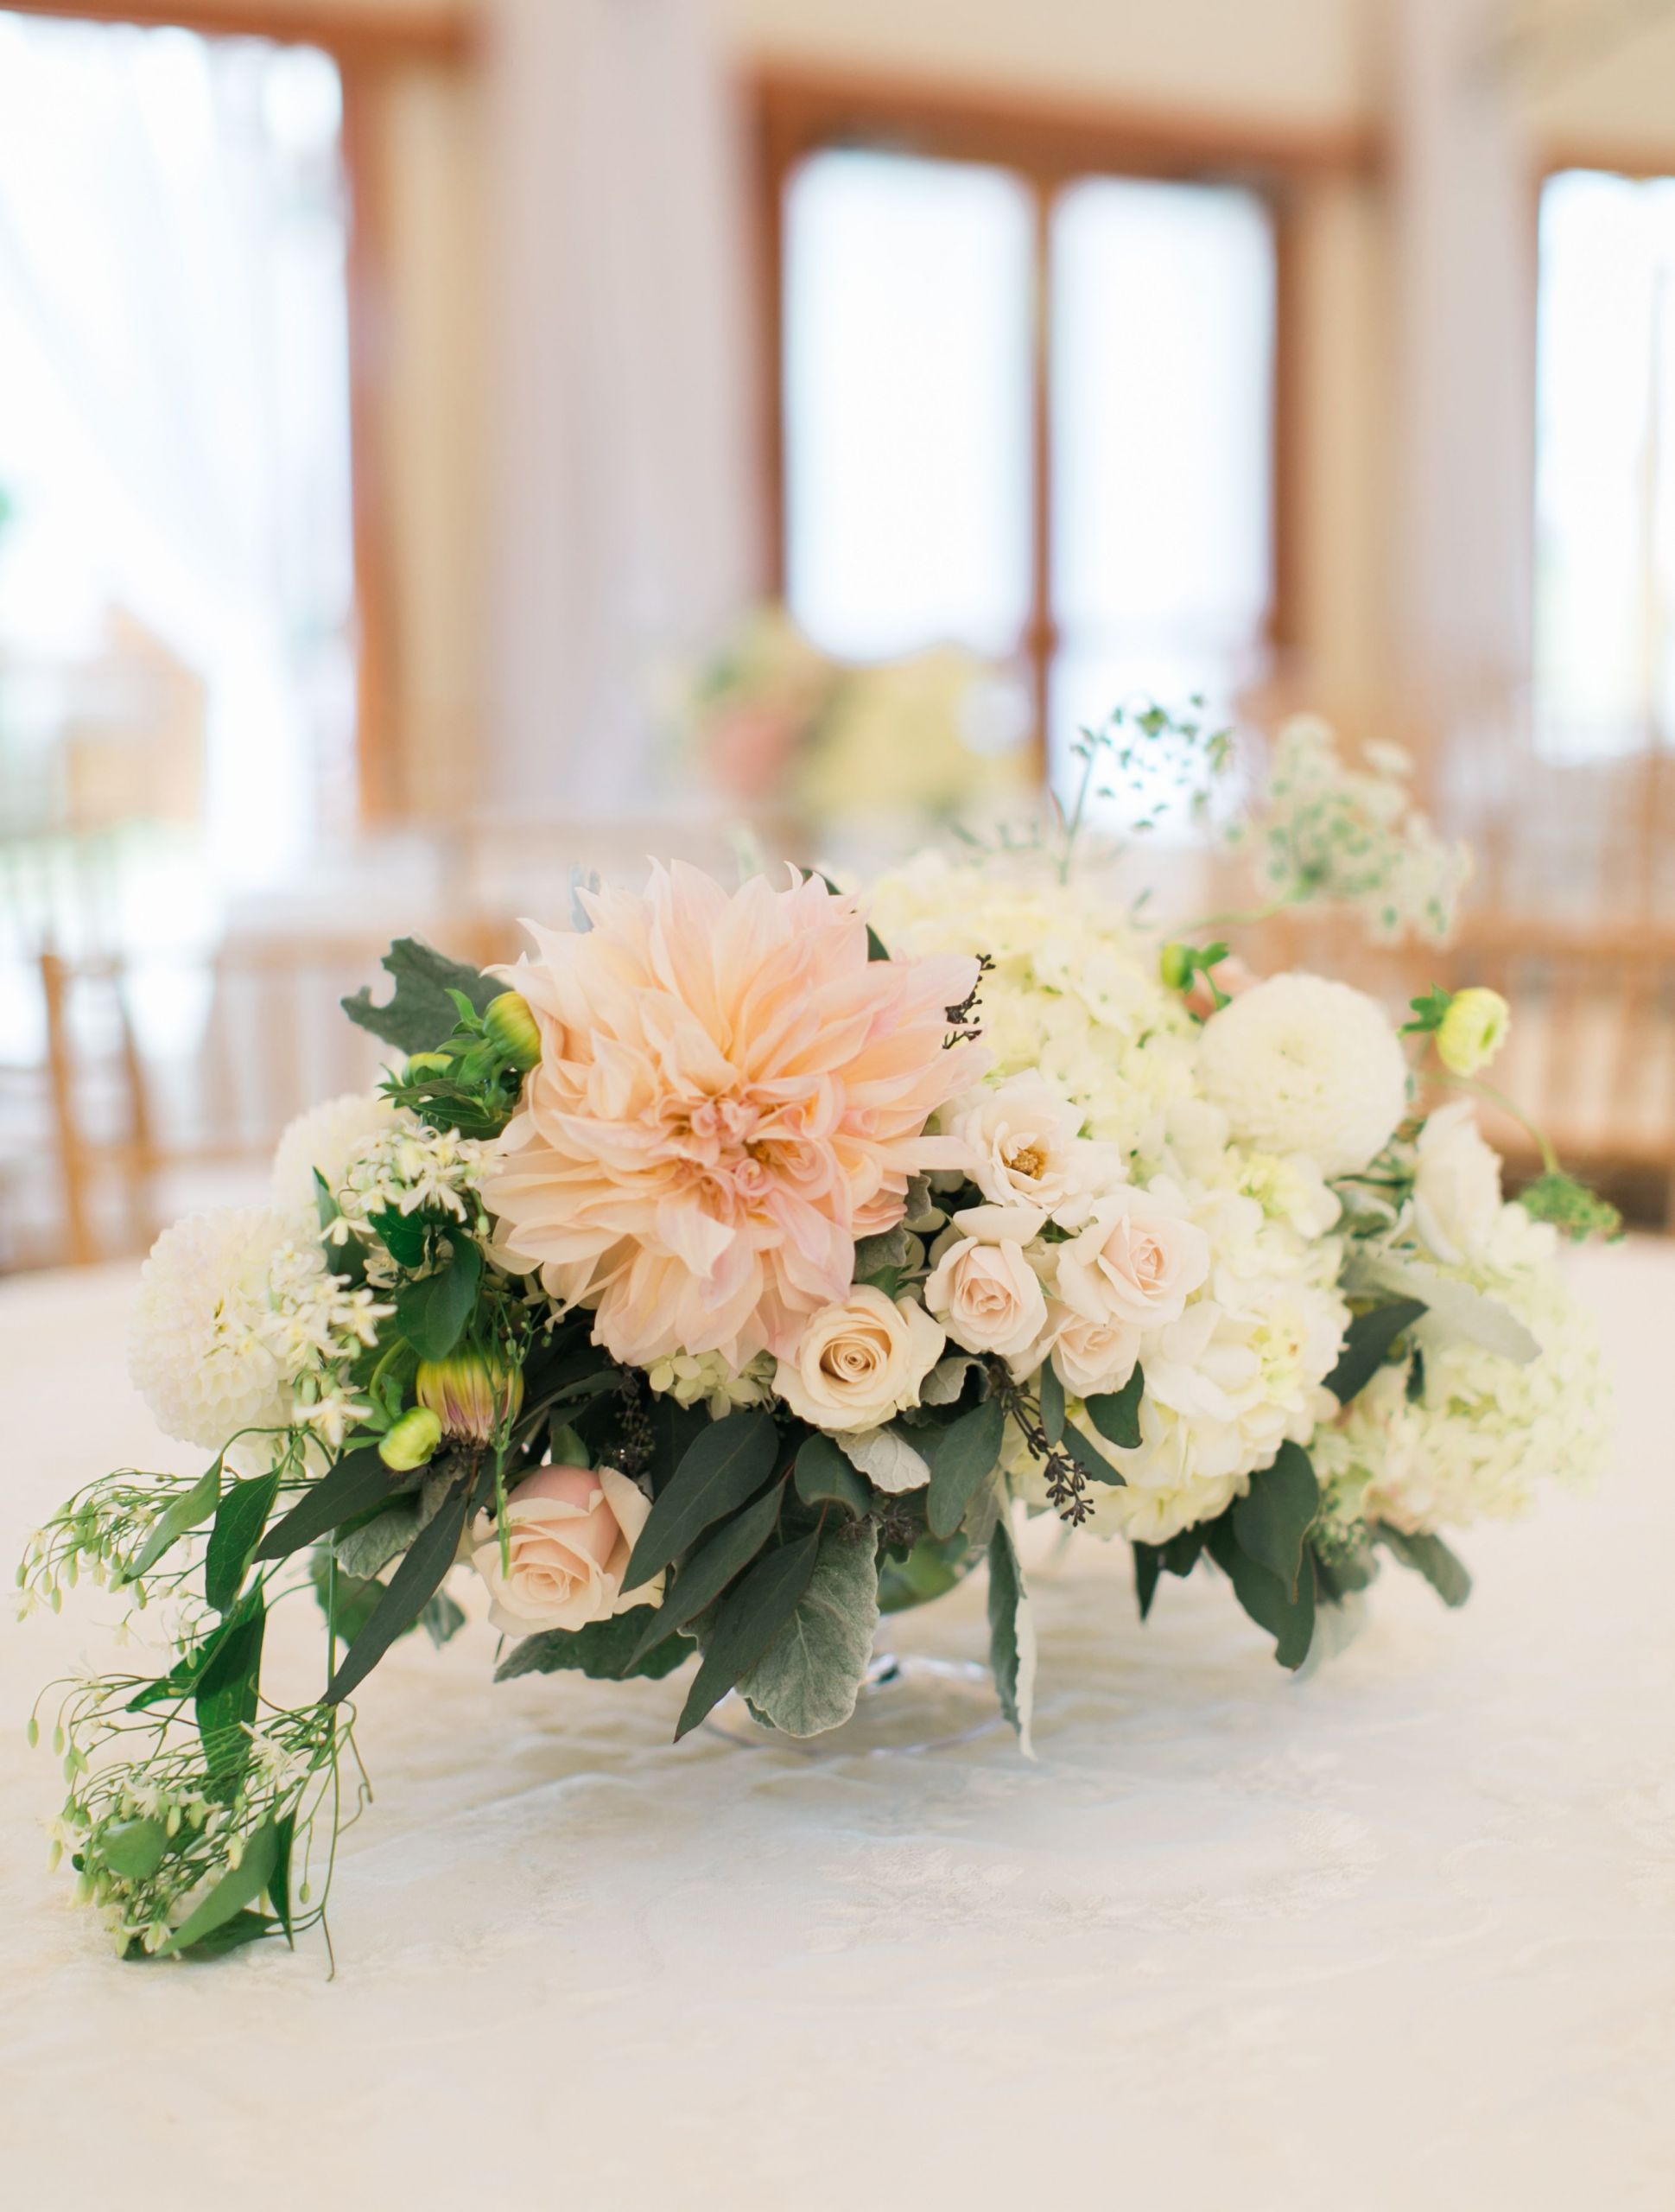 Wedding Flowers Ri
 Want this Romantic Blush Dahlia and Rose Centerpiece fire